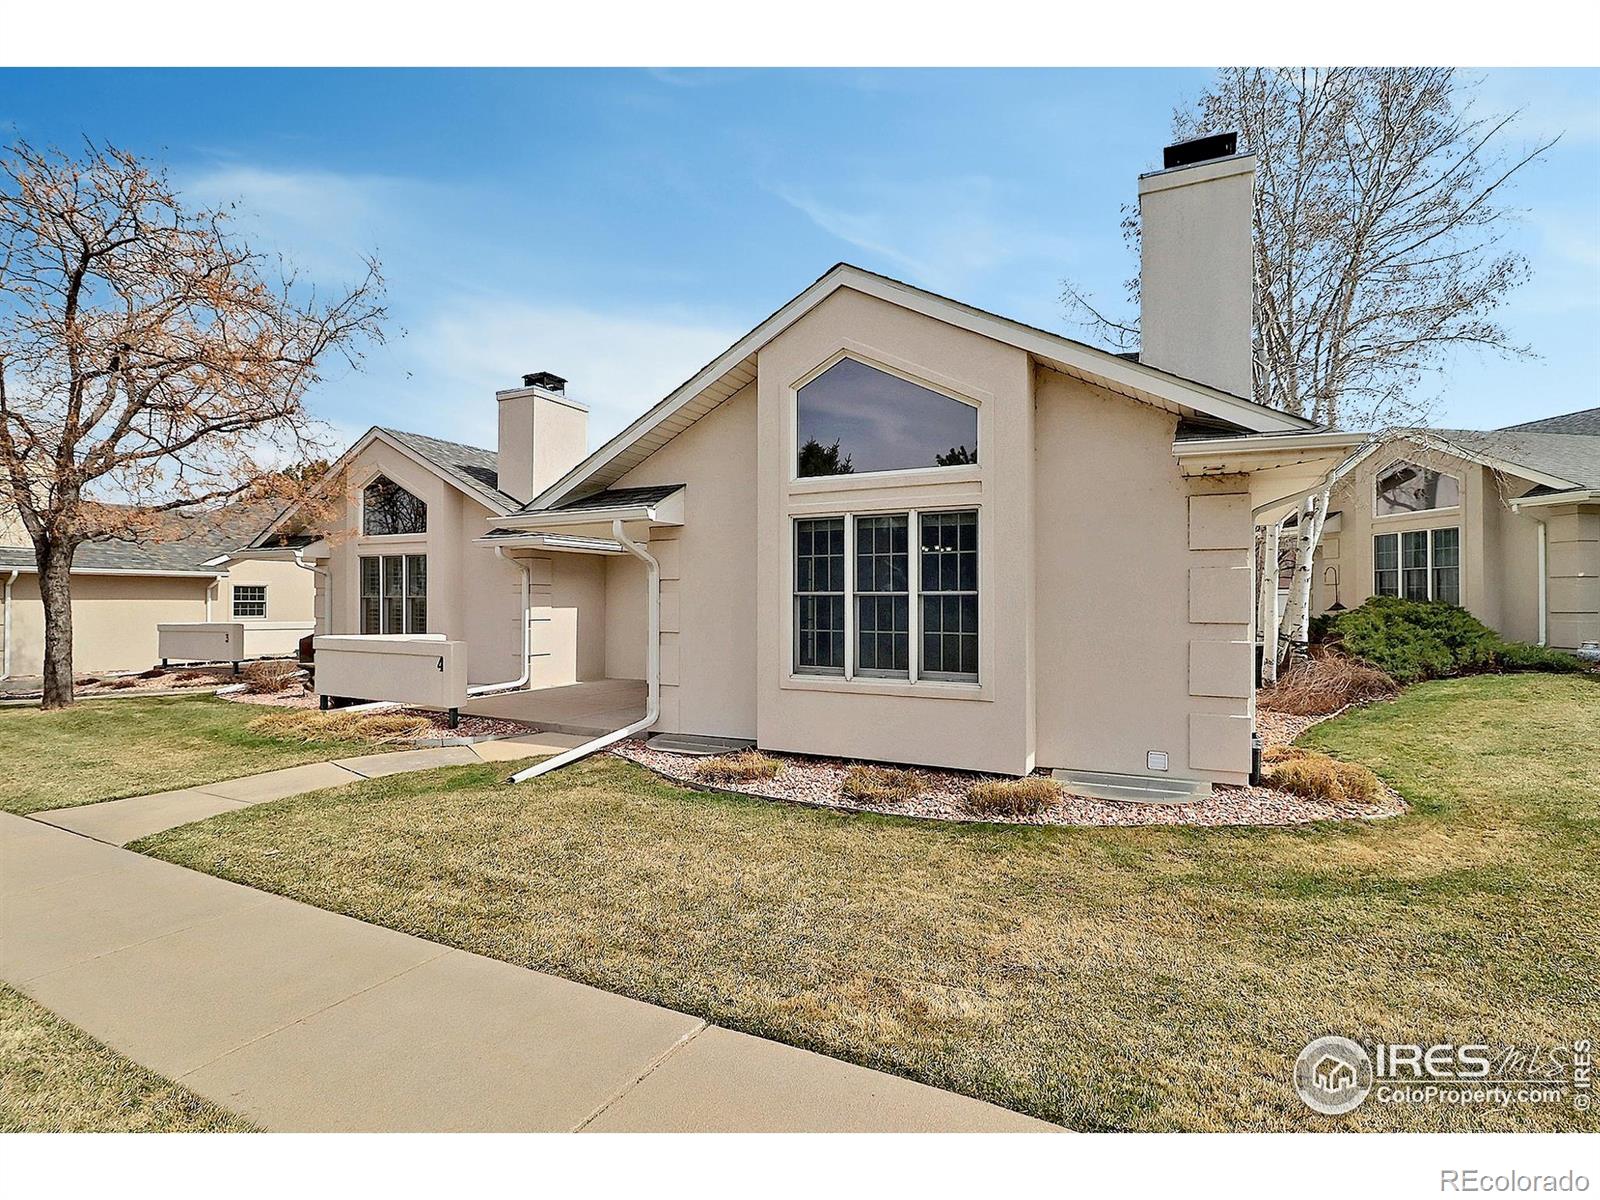 435  46th Avenue, greeley MLS: 4567891005922 Beds: 3 Baths: 3 Price: $395,000